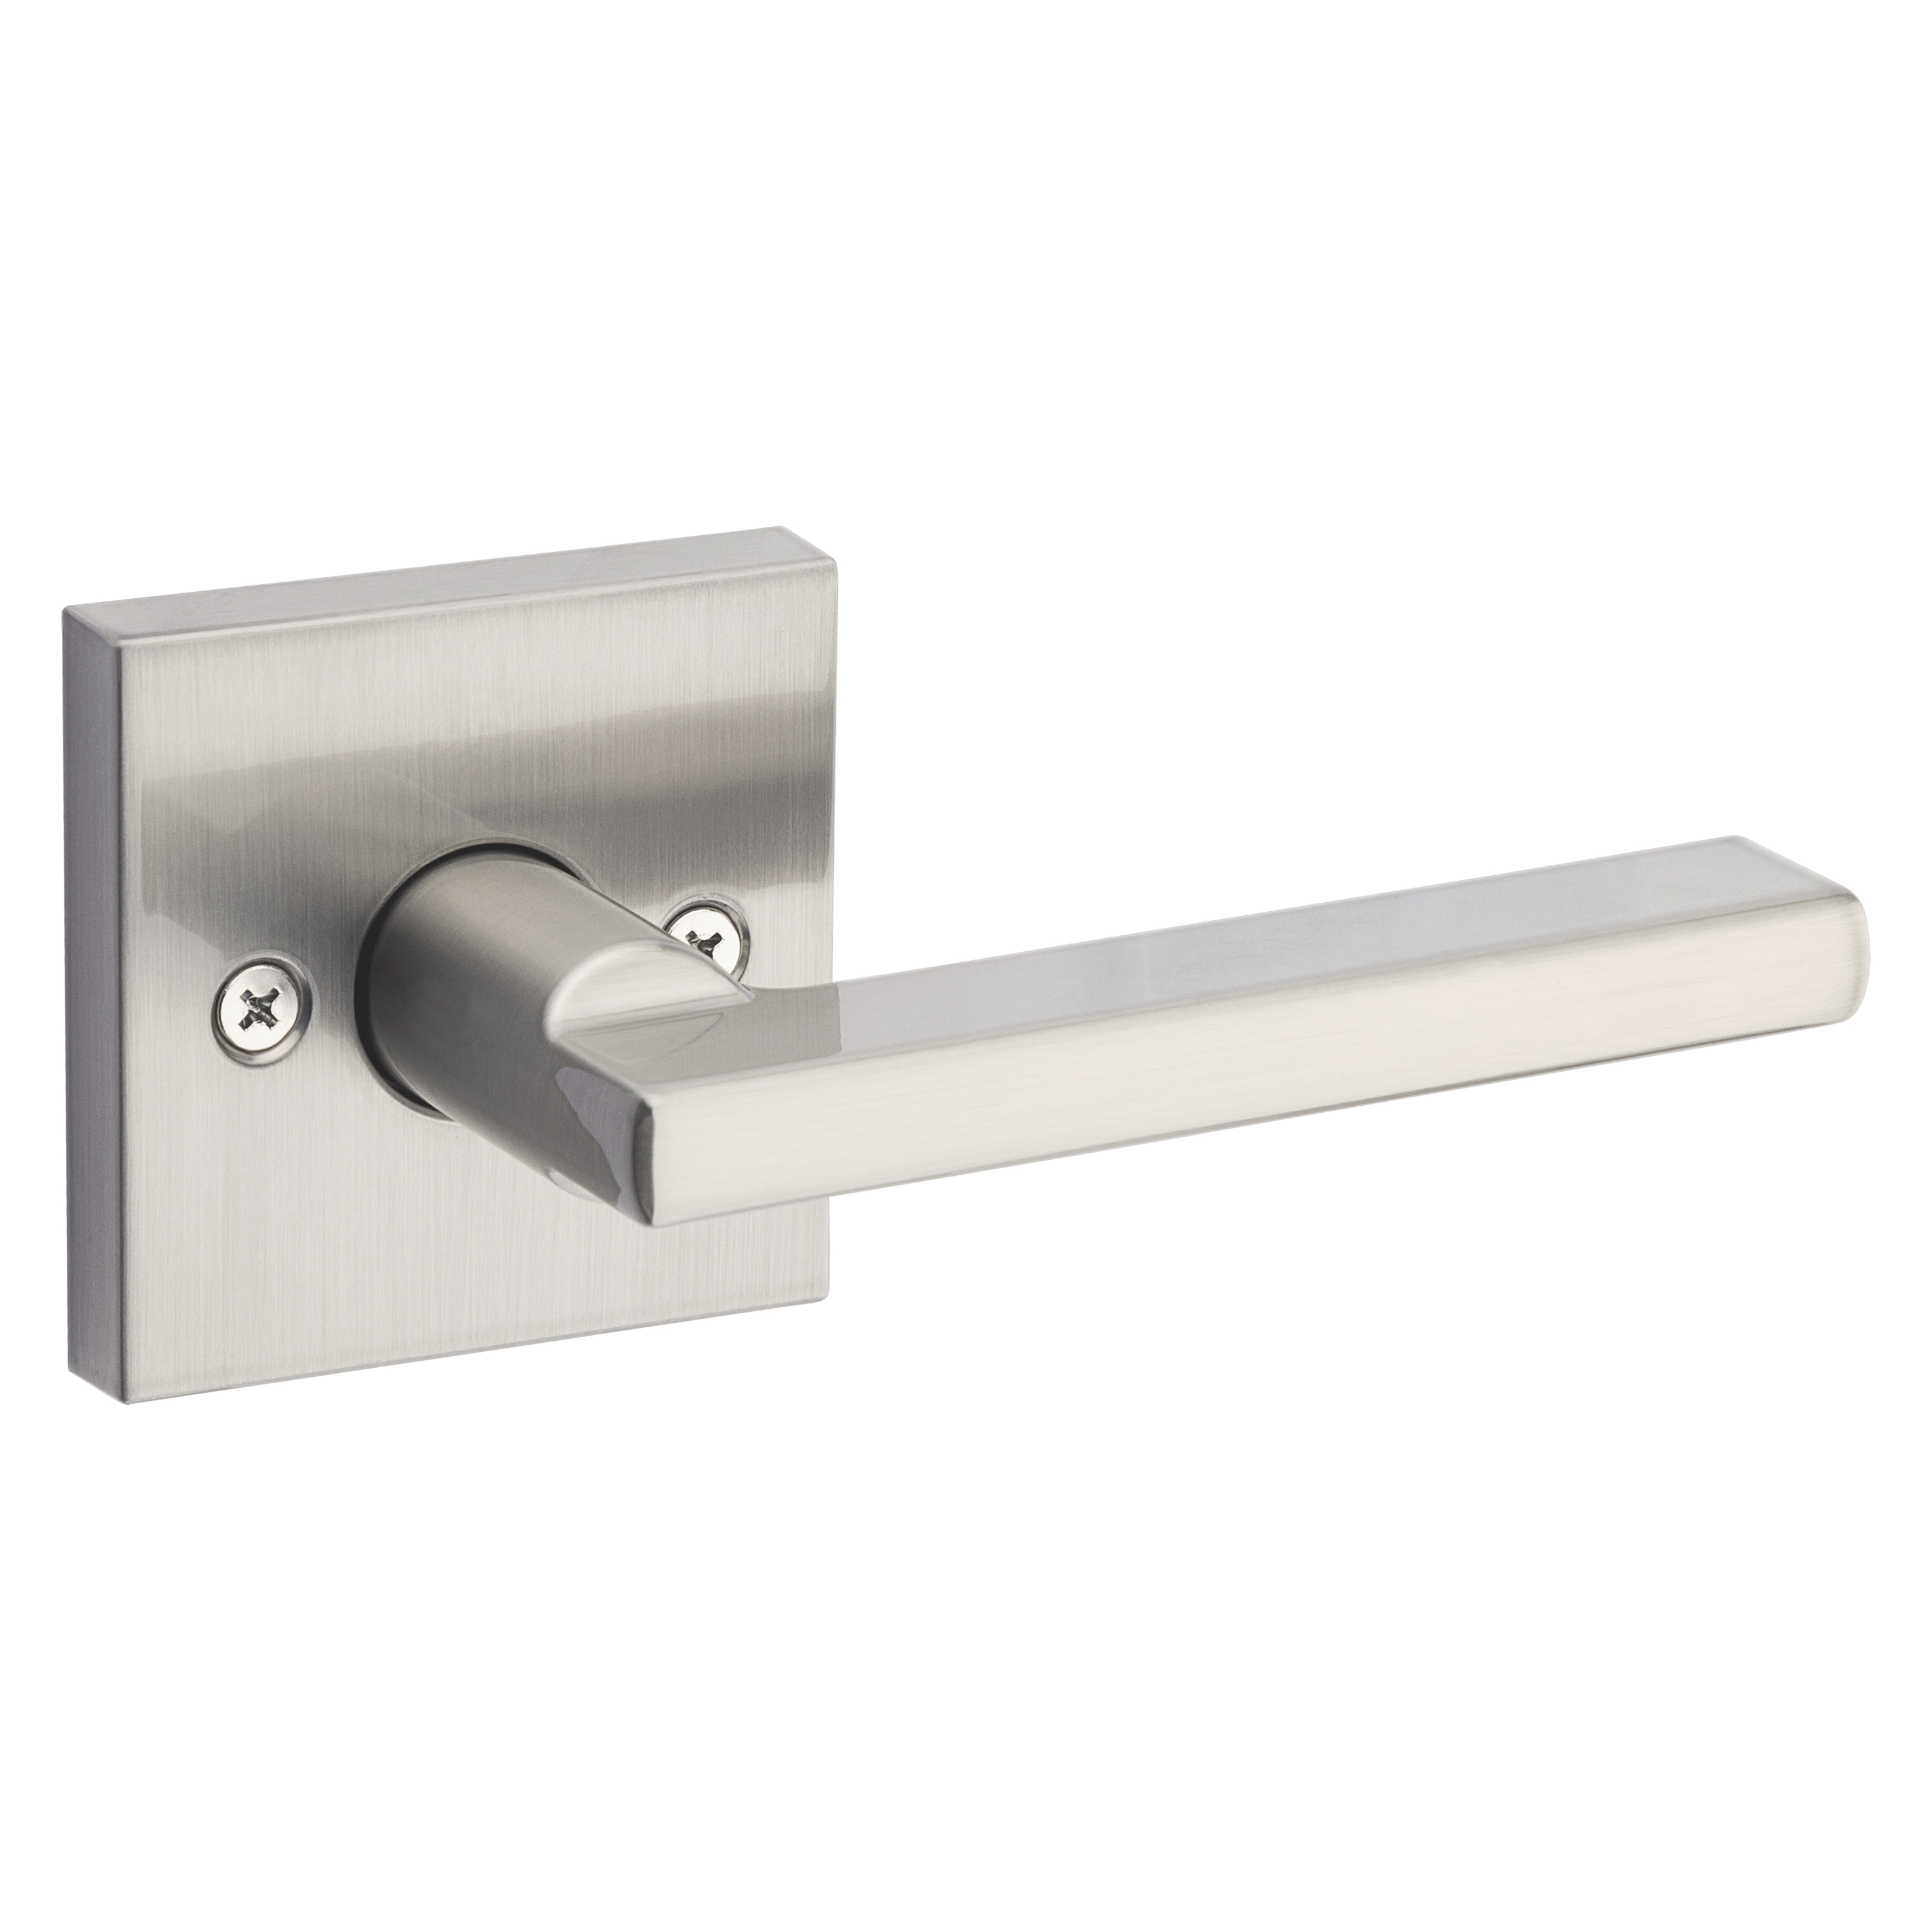 Signature Series 157HFL SQT 15 CP Half Inactive Dummy Lever, Satin Nickel, Zinc, Residential, Reversible Hand